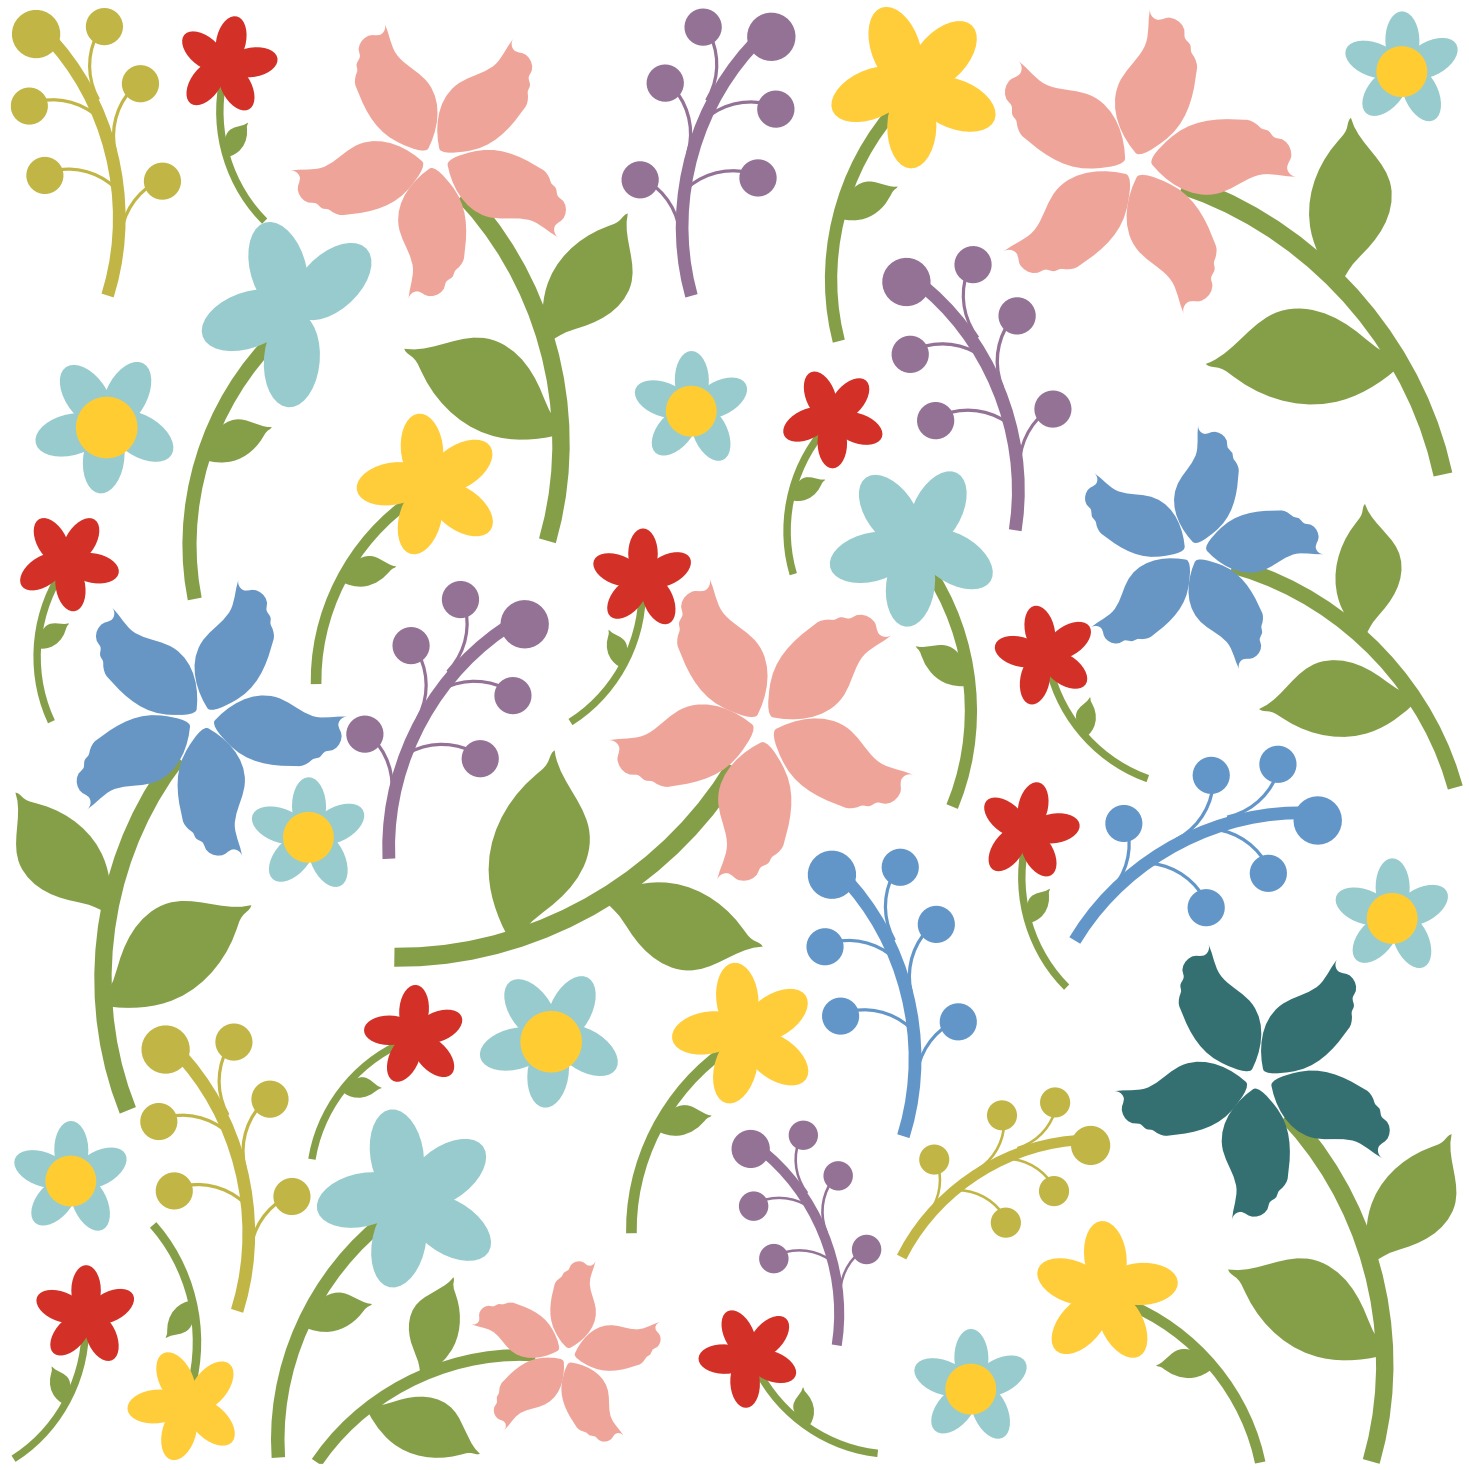 Beautiful flowers illustration background 02 vector Free ...